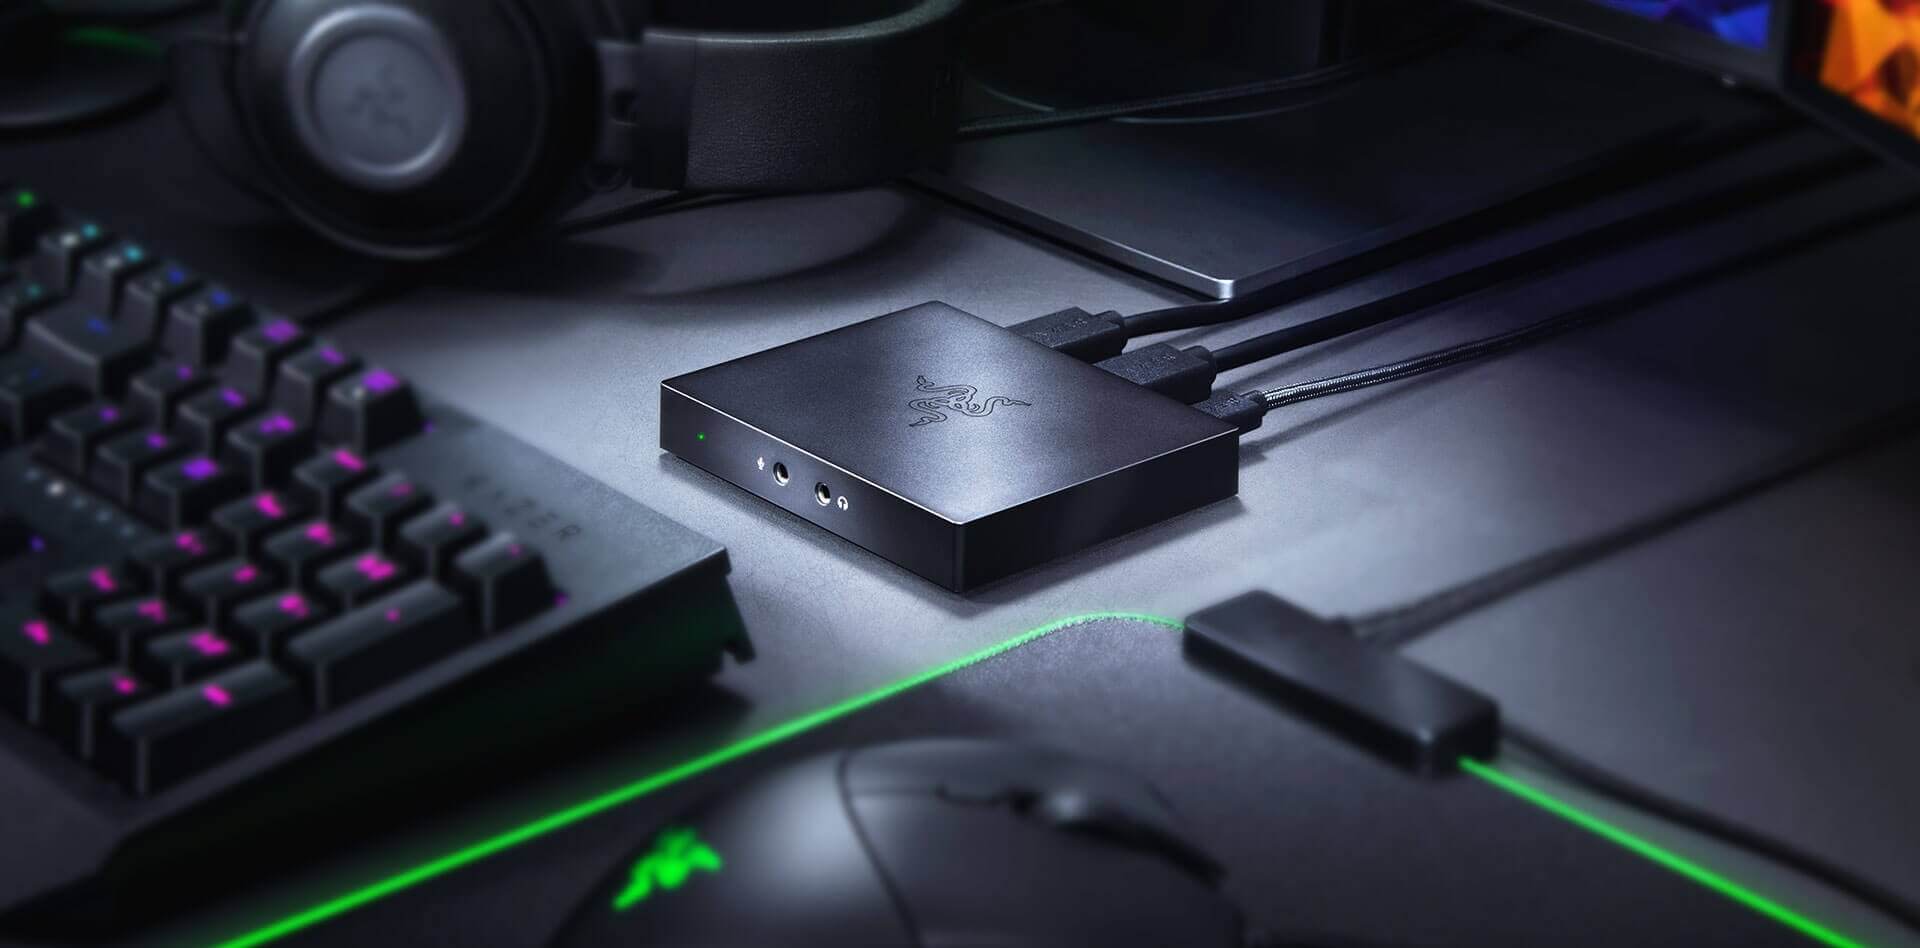 Razer Ripsaw HD capture card offers 4K passthrough at a reasonable price